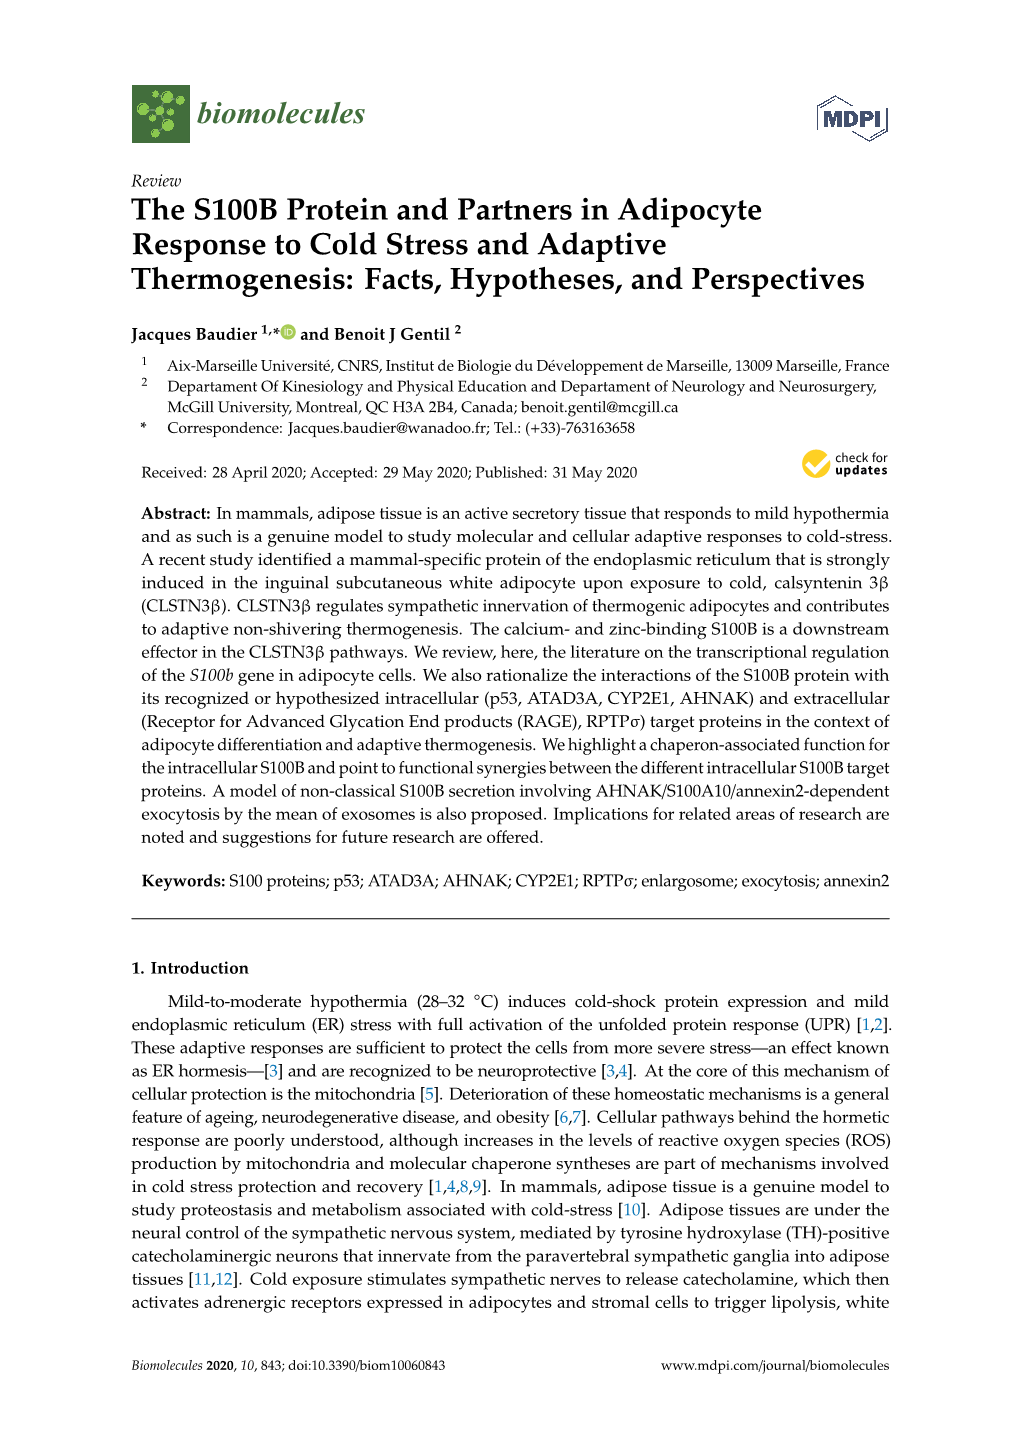 The S100B Protein and Partners in Adipocyte Response to Cold Stress and Adaptive Thermogenesis: Facts, Hypotheses, and Perspectives